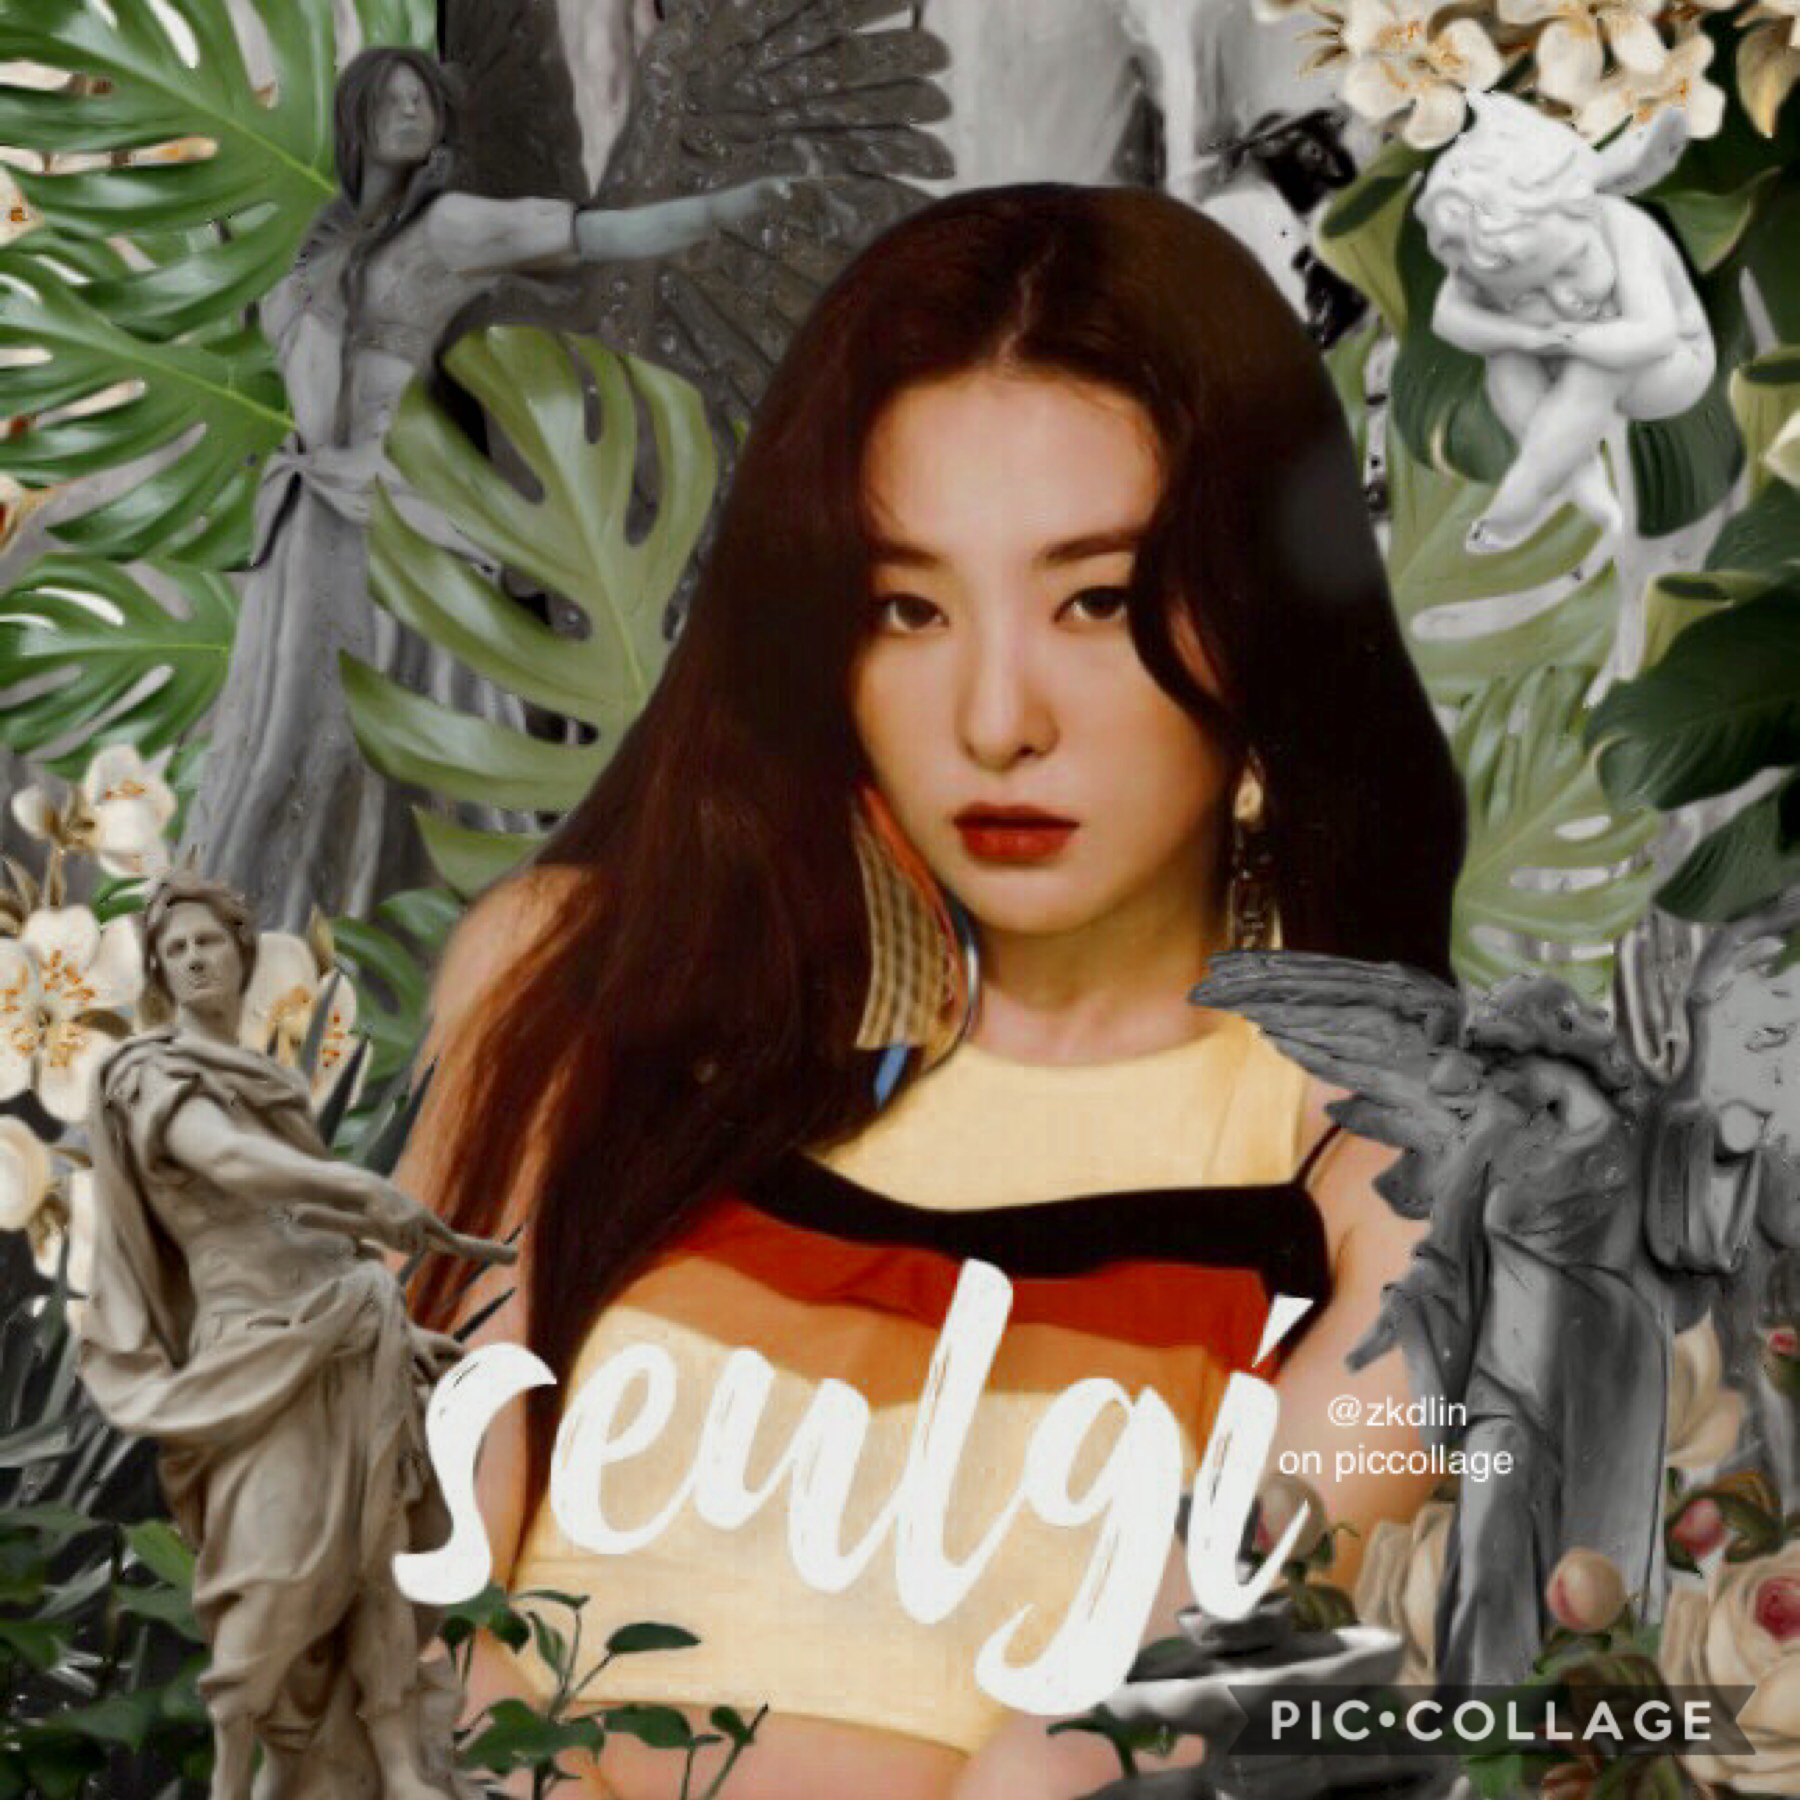 🌊ｒｅｄ ｓｕｍｍｅｒ (tap)
ok i spent like 10 hours trying to make an edit but i gave up...
well
it kinda looks like @jUsT-peachy’s edits...? idk
and it wasn’t inspired by her edits lol her edits are way better than this
-
qotd: red velvet bias?
a: all of them 🤠✌️